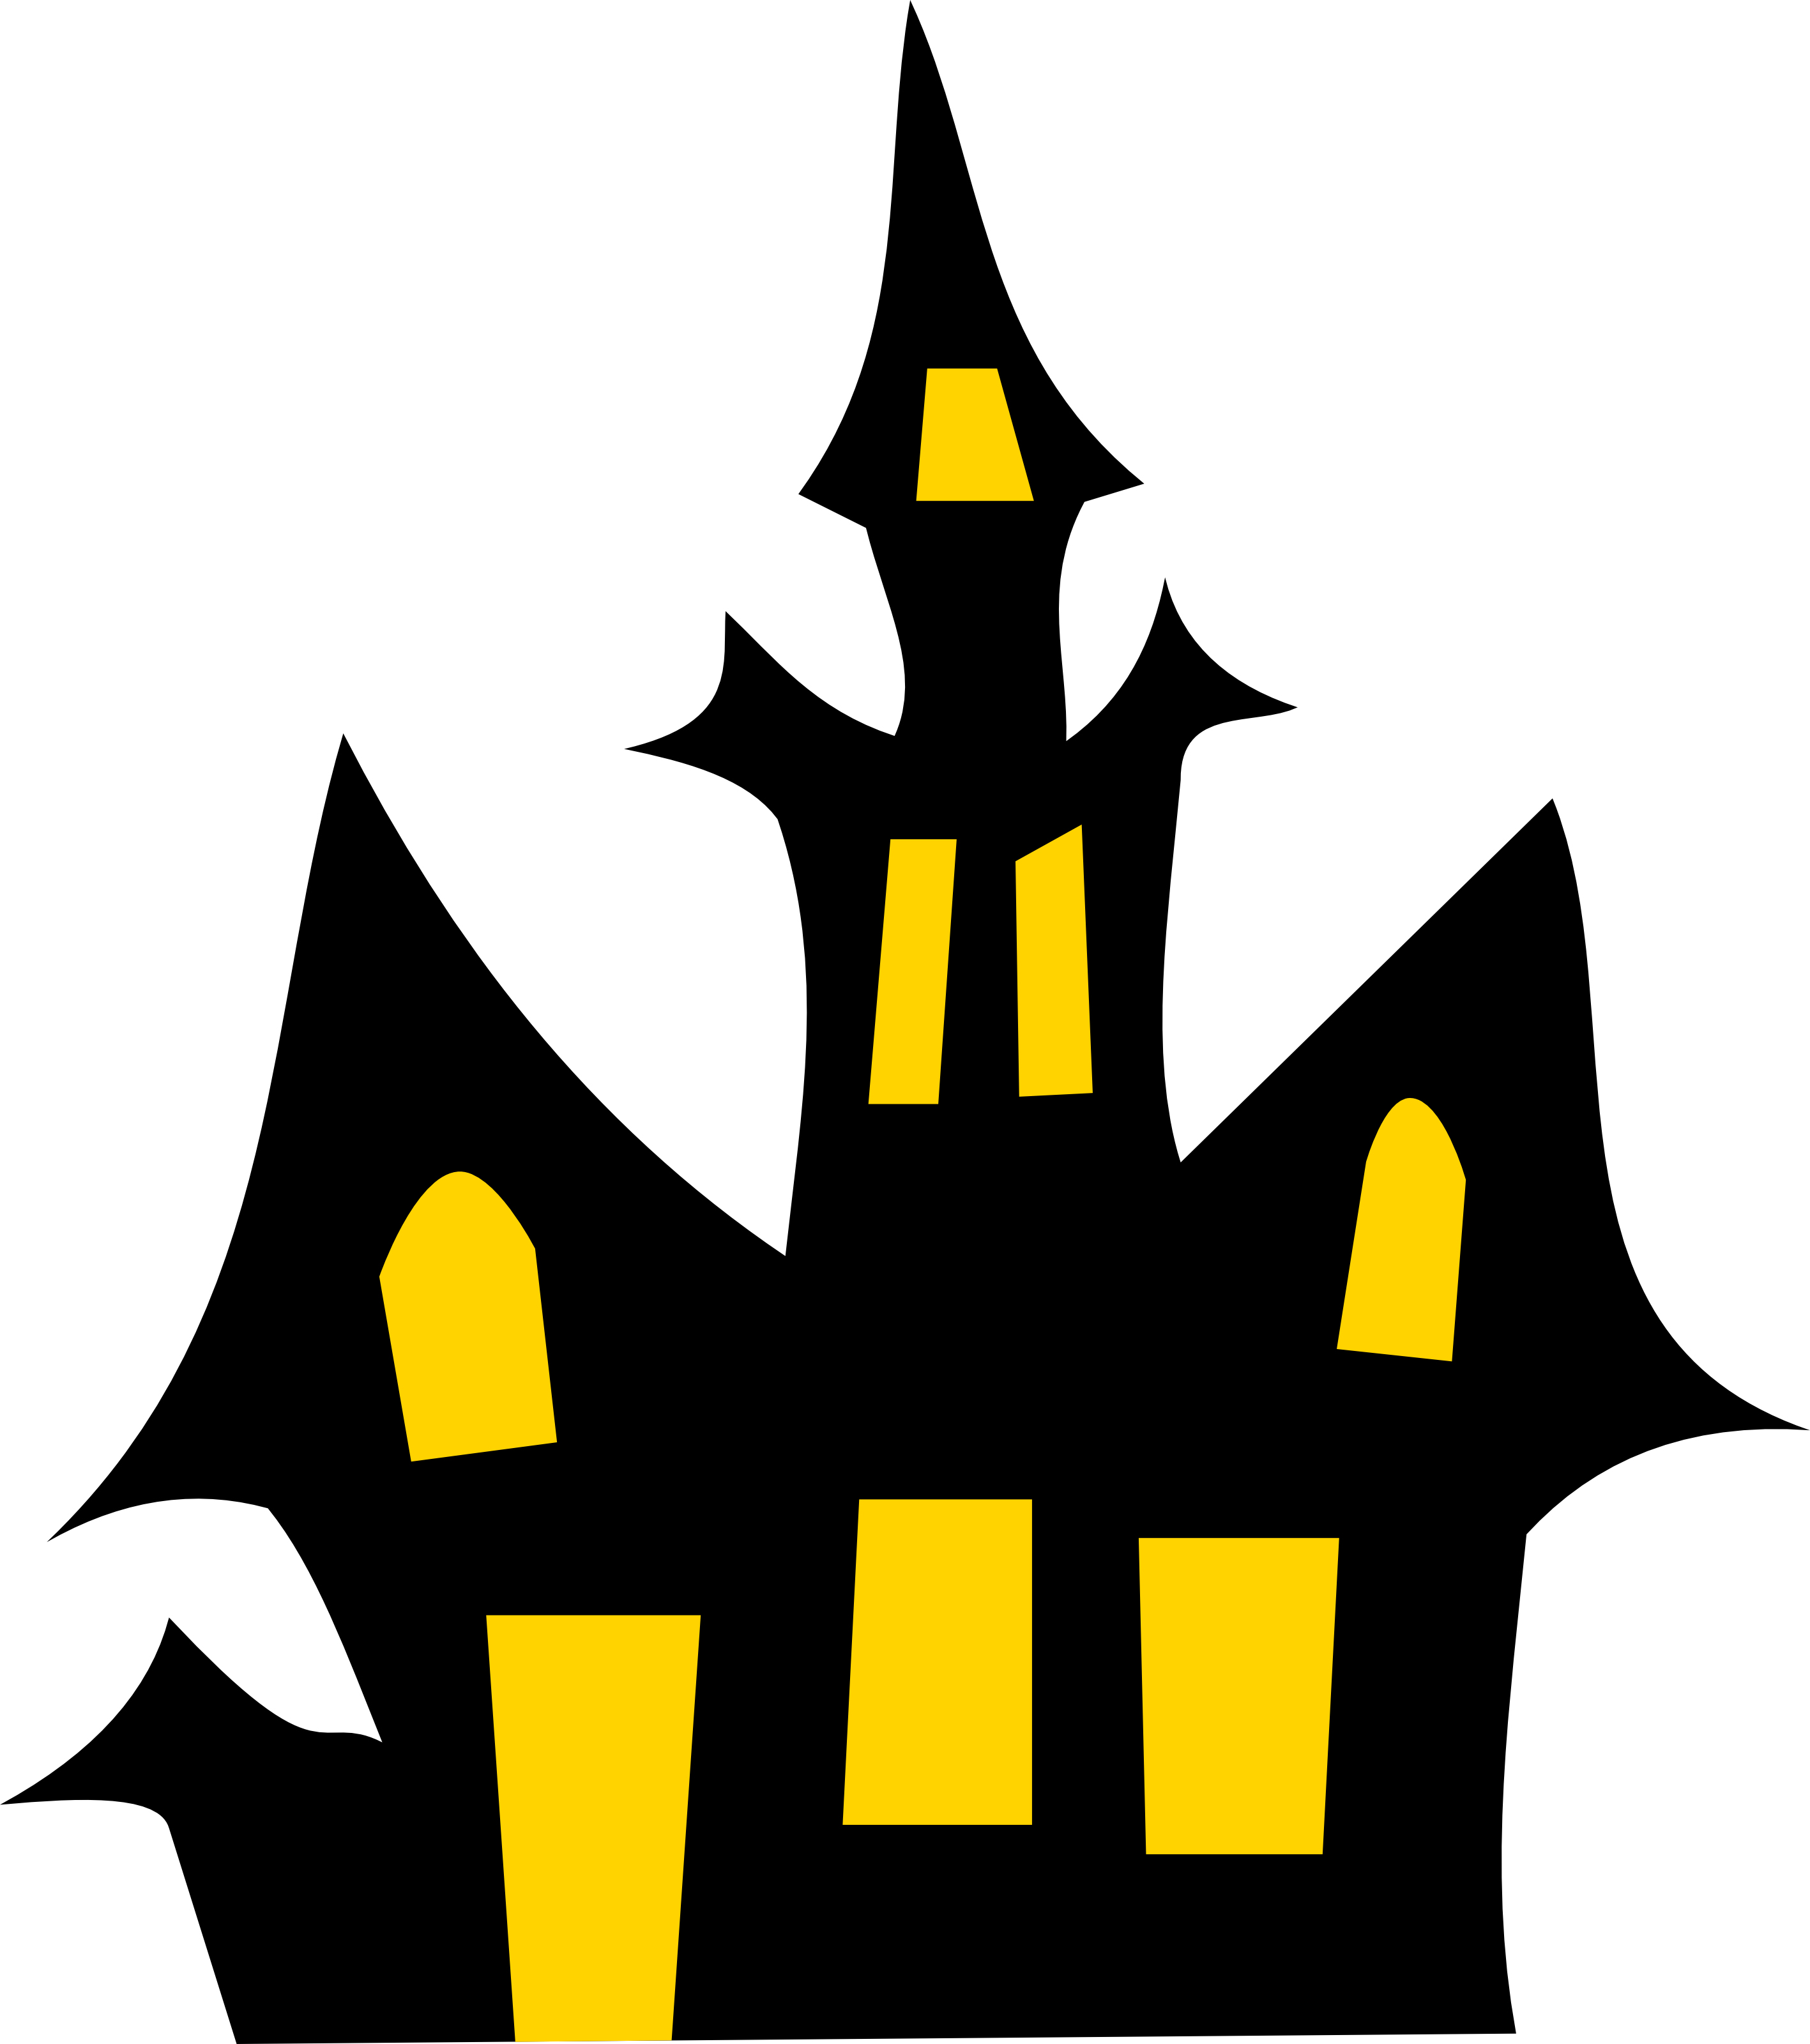 Witches Houses Clip Art - ClipArt Best